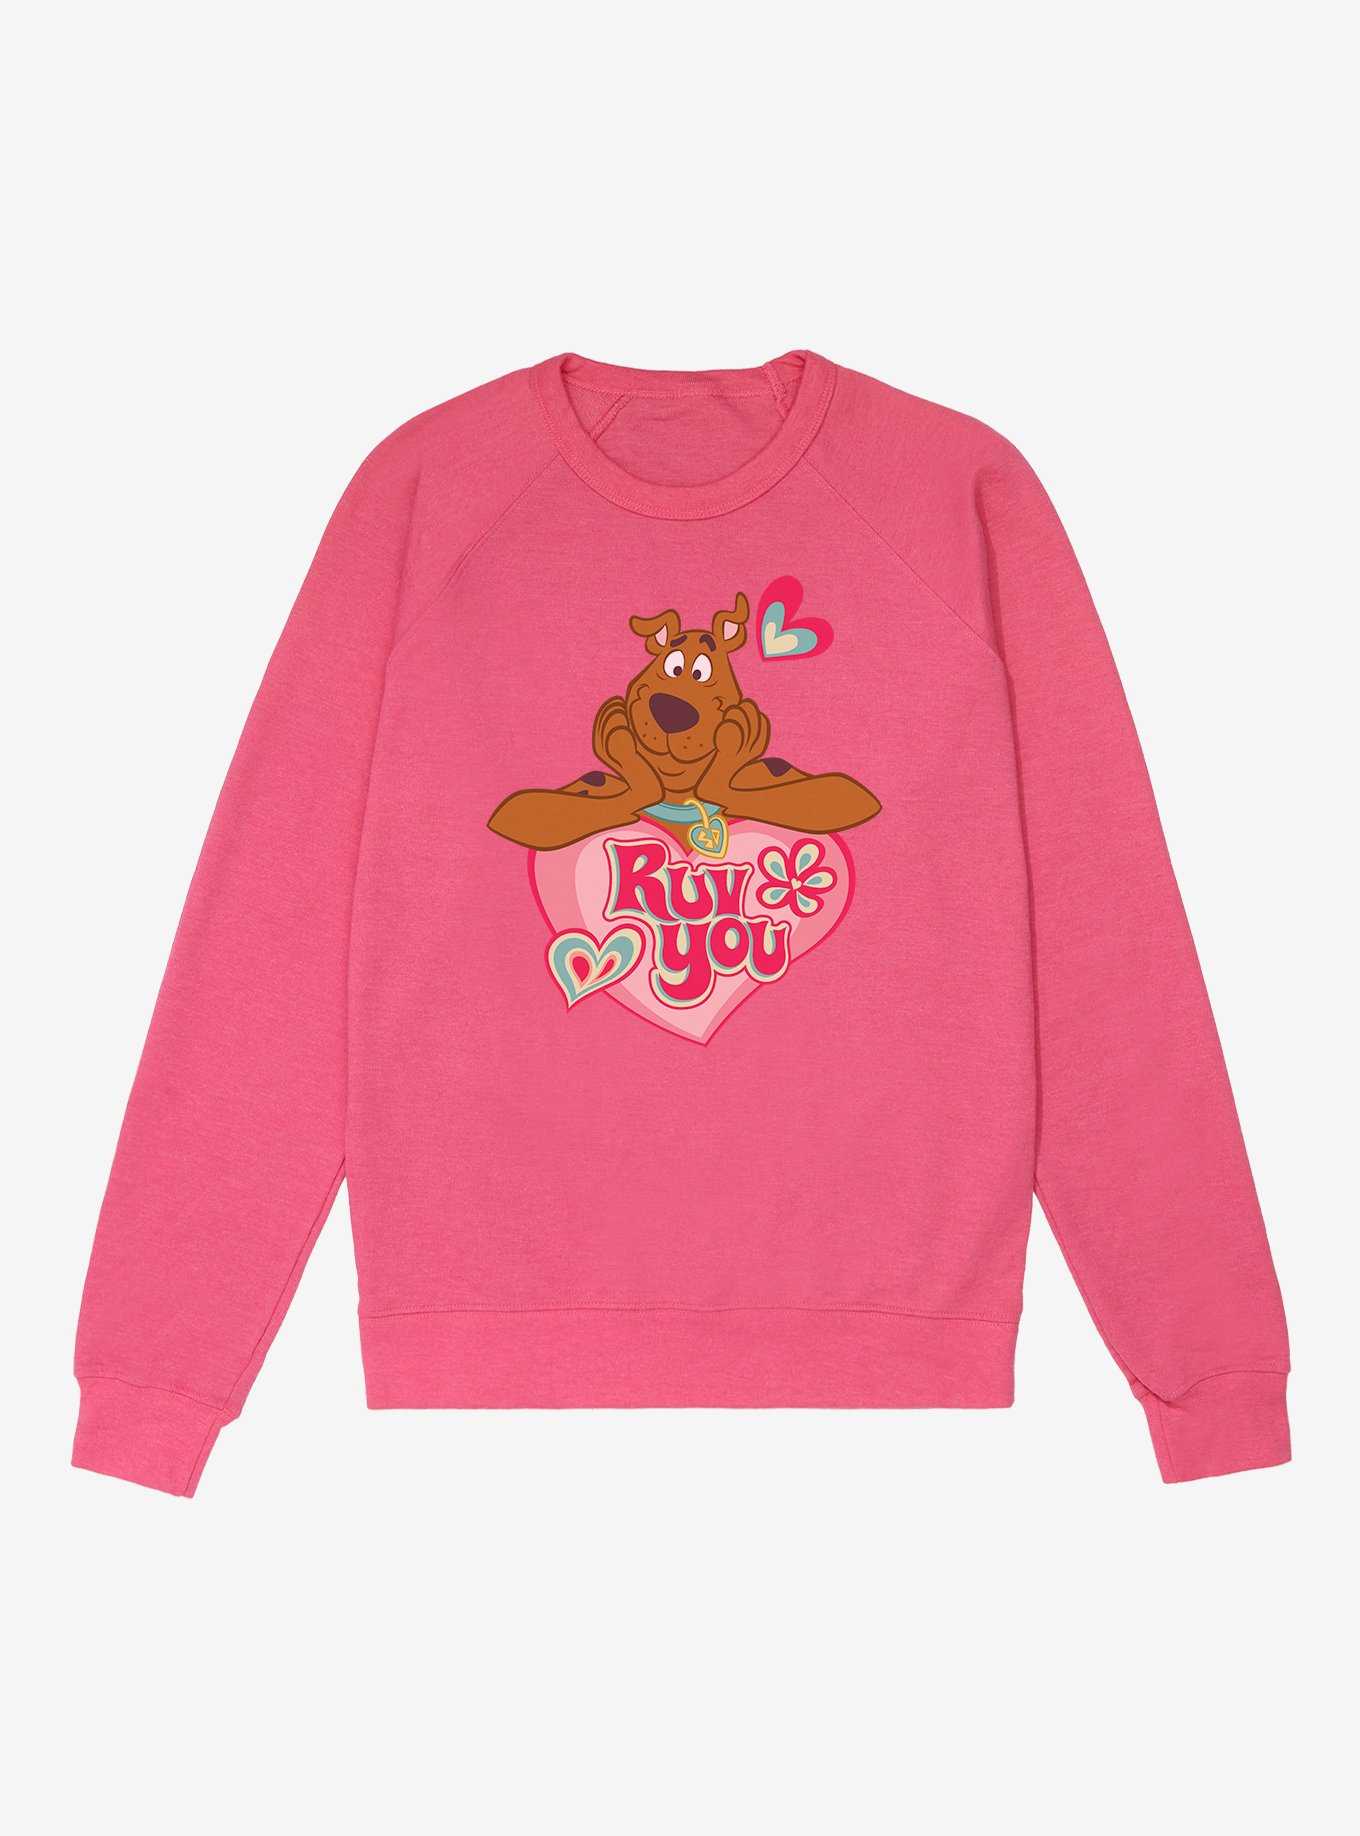 OFFICIAL Scooby-Doo Hoodies & Gifts Sweaters | BoxLunch